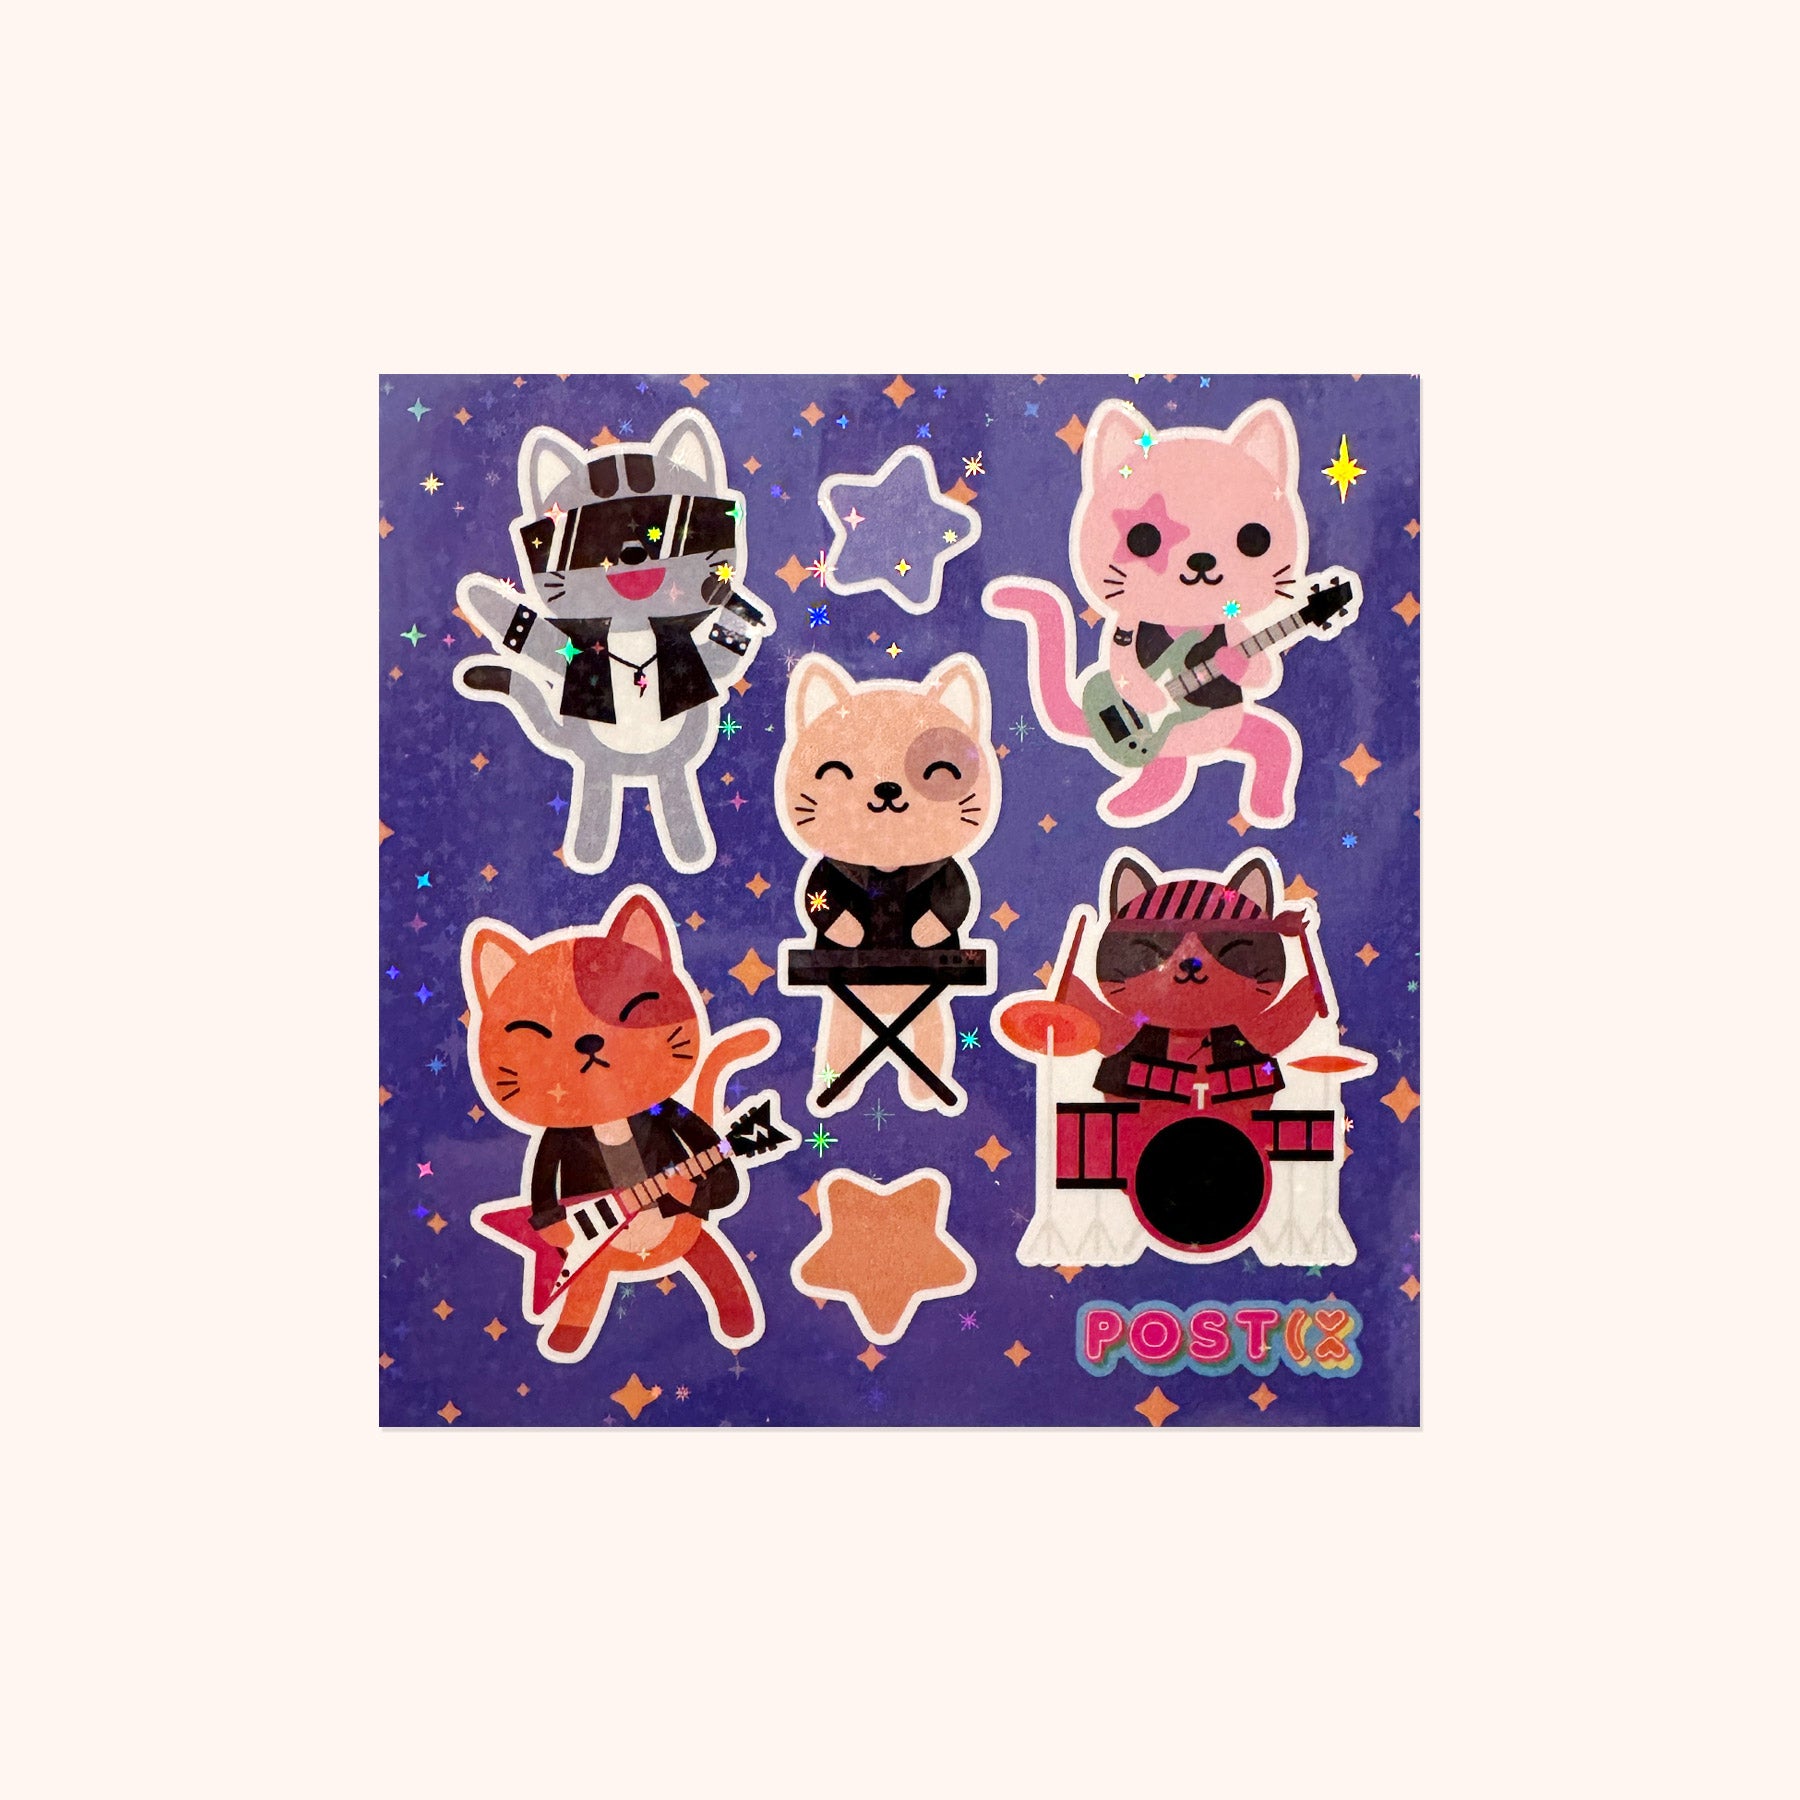 Cute Fighters Square Hologram Sticker Sheet